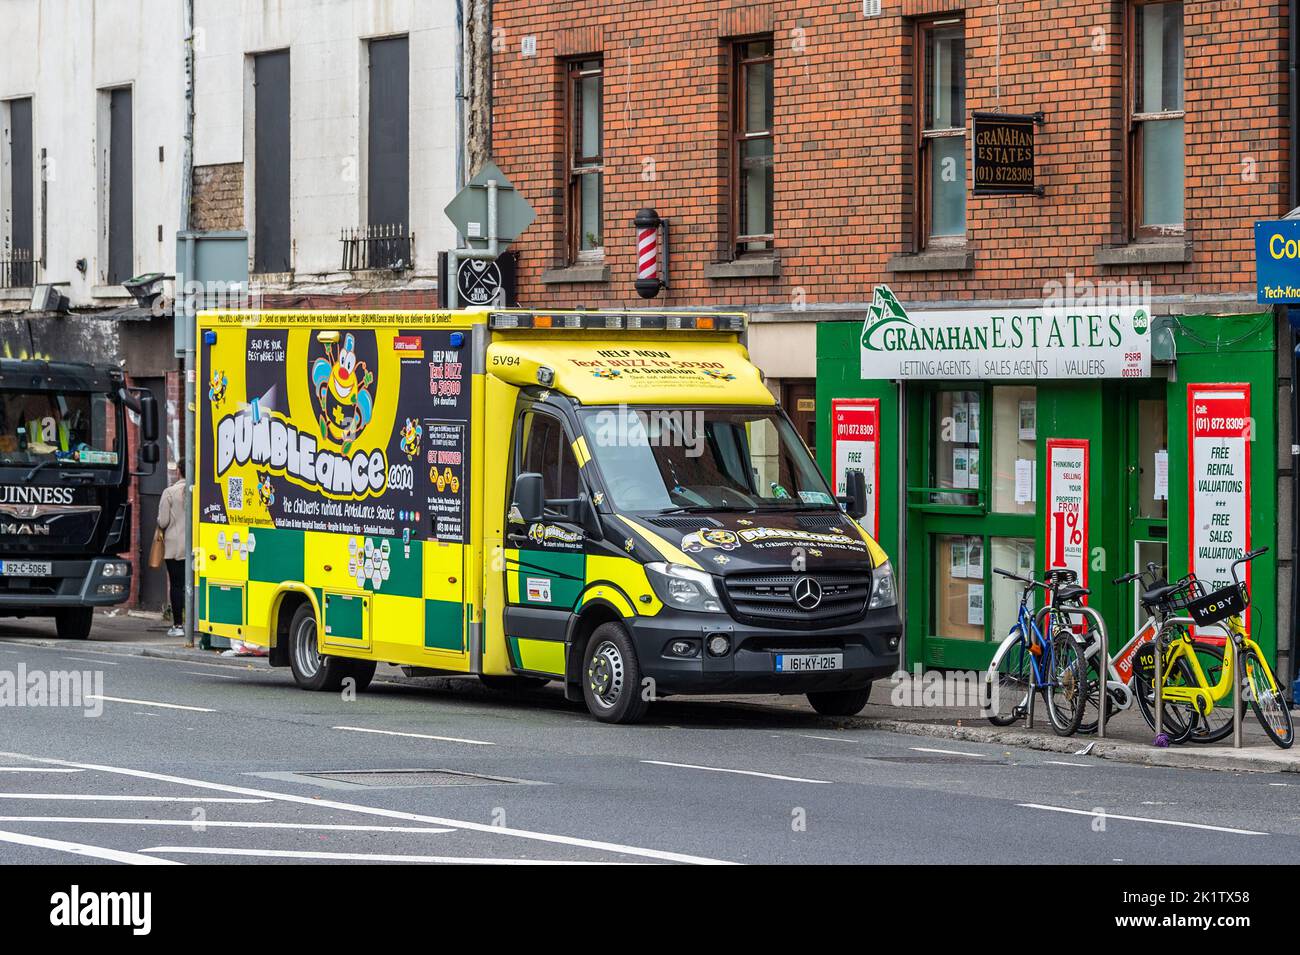 Bumbleance Ambulance parked on the street in Dublin City Centre, Ireland. Stock Photo